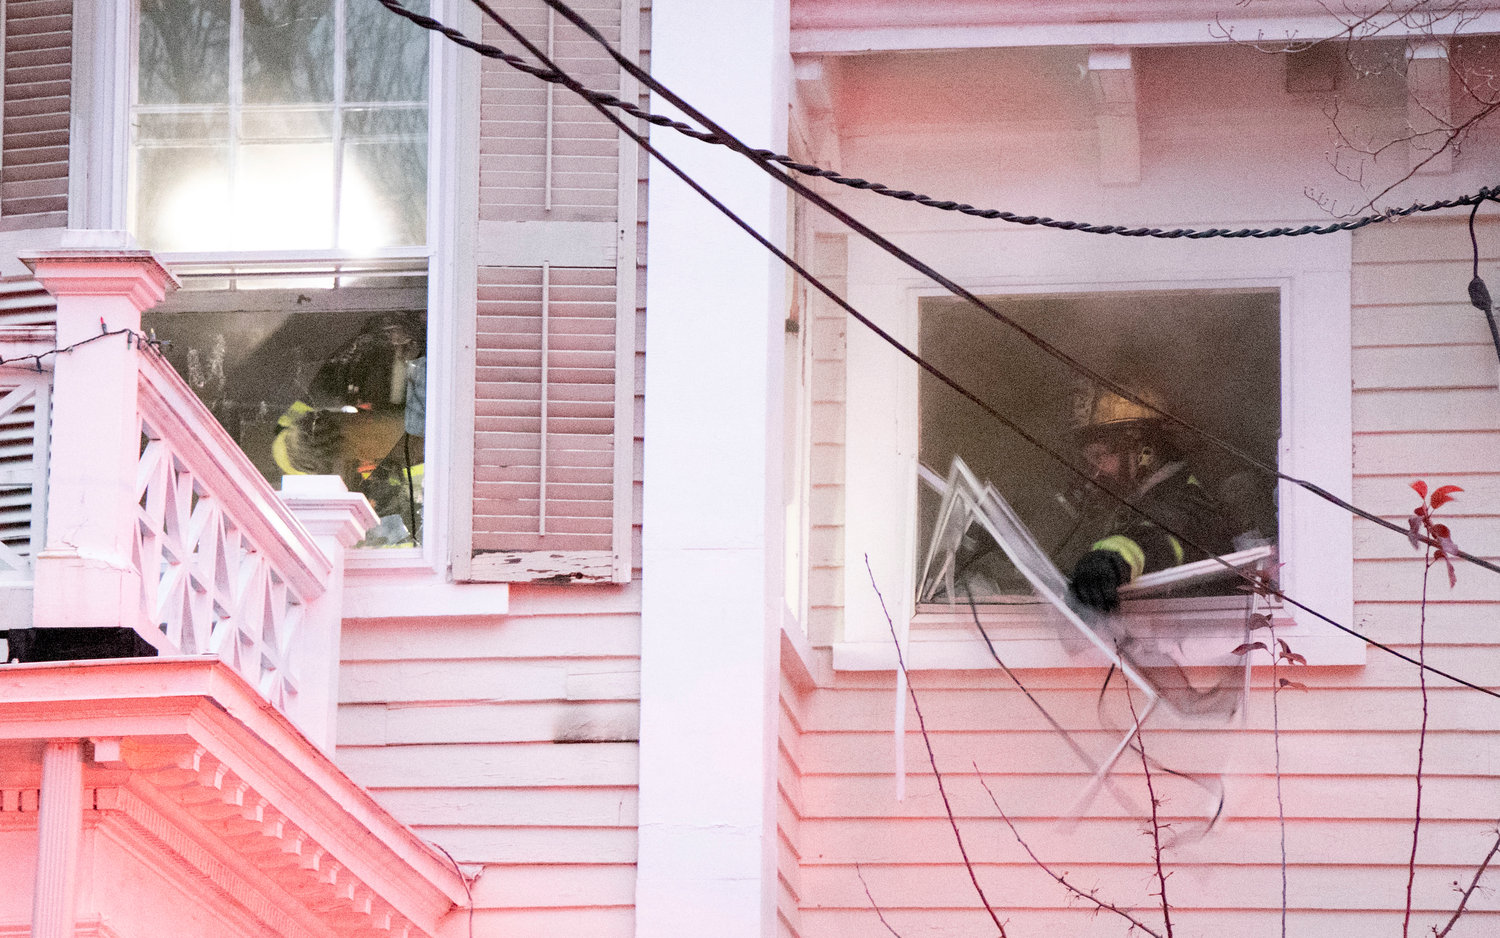 A firefighter breaks a window to let smoke out of the house as they try to find the source of the fire.